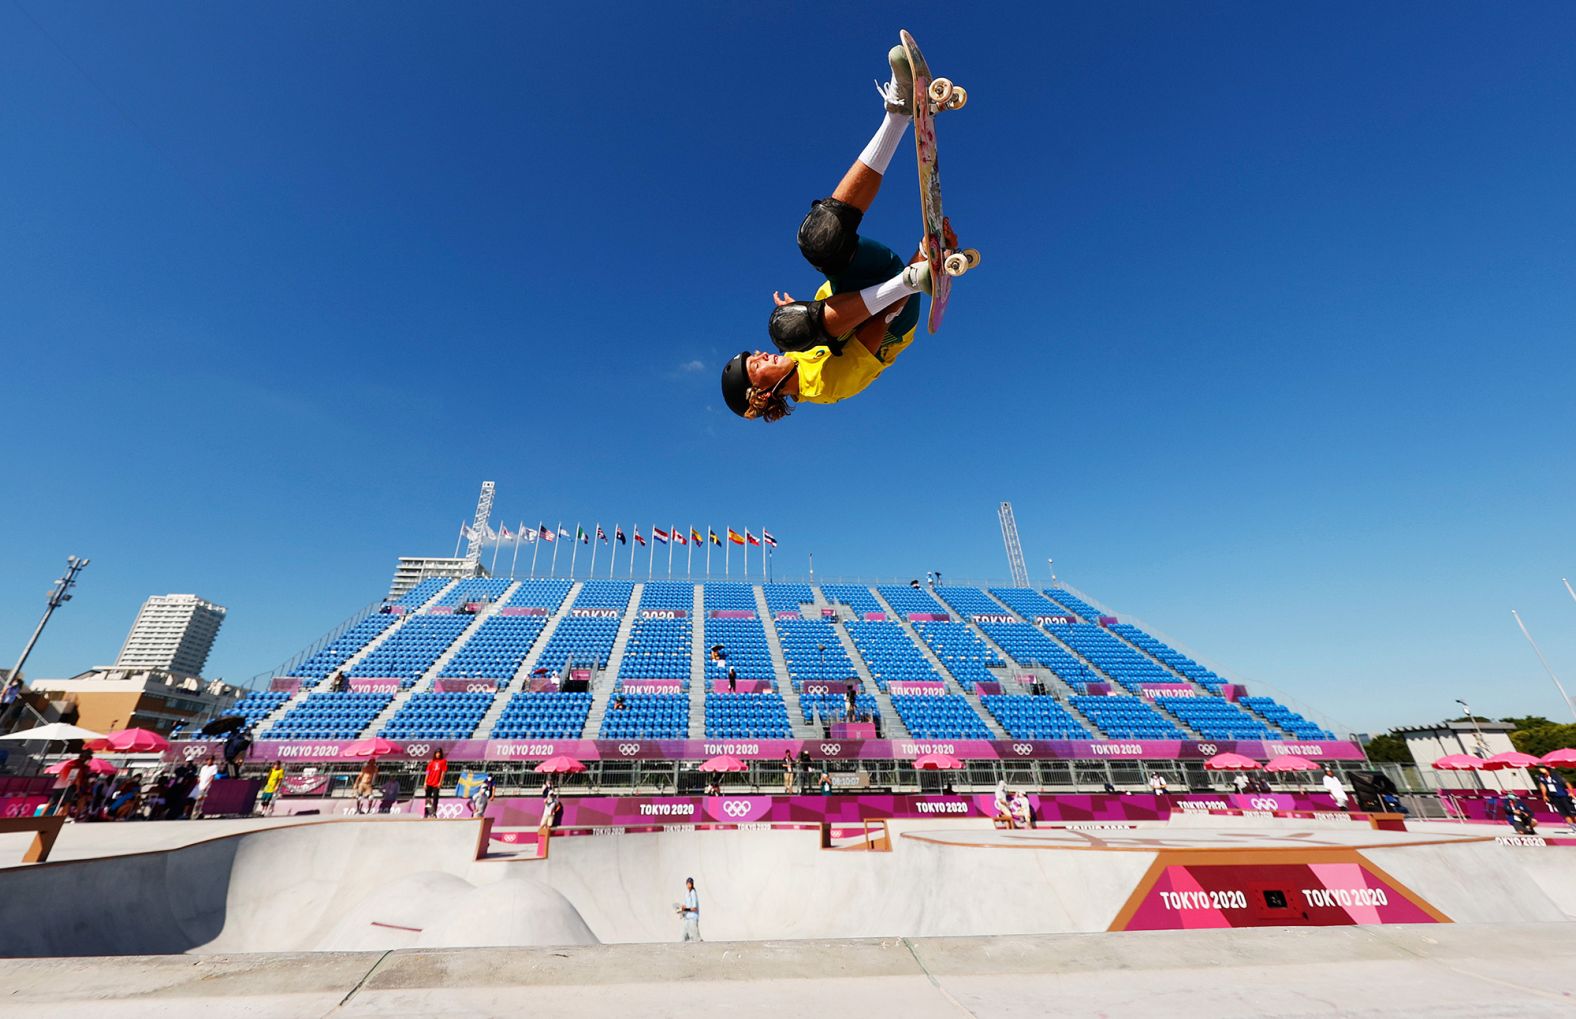 Australia's Keegan Palmer warms up prior to the park skateboarding competition on August 5. <a href="index.php?page=&url=https%3A%2F%2Fwww.cnn.com%2Fworld%2Flive-news%2Ftokyo-2020-olympics-08-05-21-spt%2Fh_3b0447ab85bc74a7de159247fed341ad" target="_blank">Palmer went on to win gold in the event.</a>